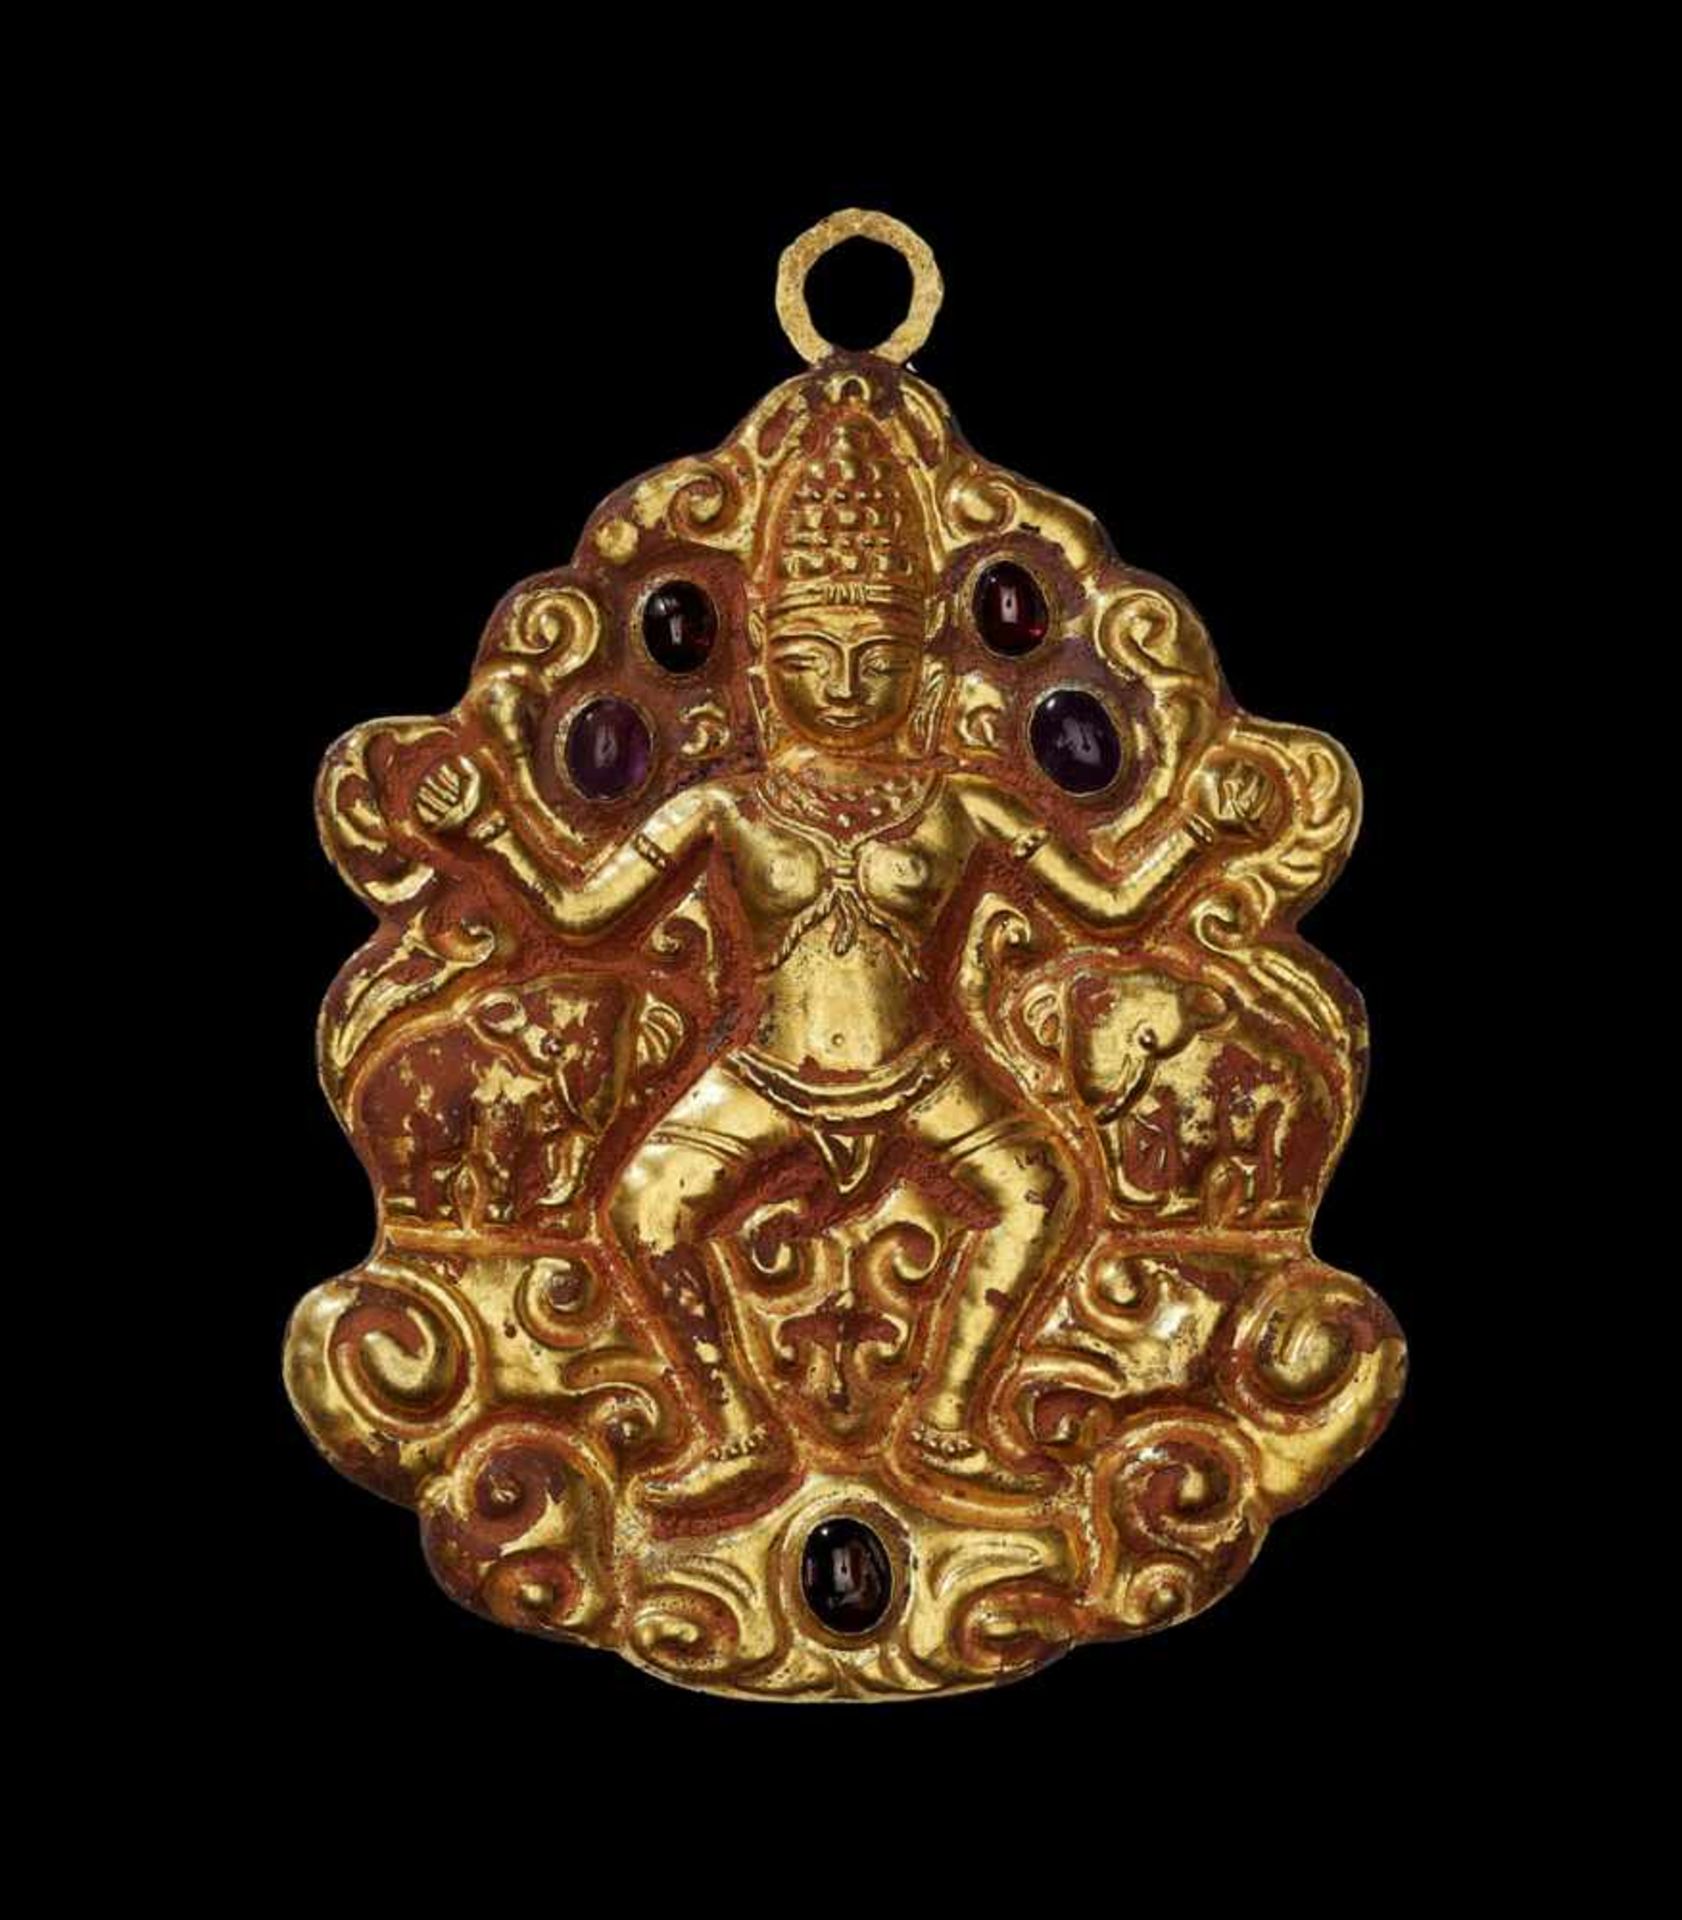 A RARE CHAM REPOUSSÉ GOLD PENDANT WITH DANCING INDRA AND ELEPHANTS Central Cham kingdom, classical - Image 3 of 4